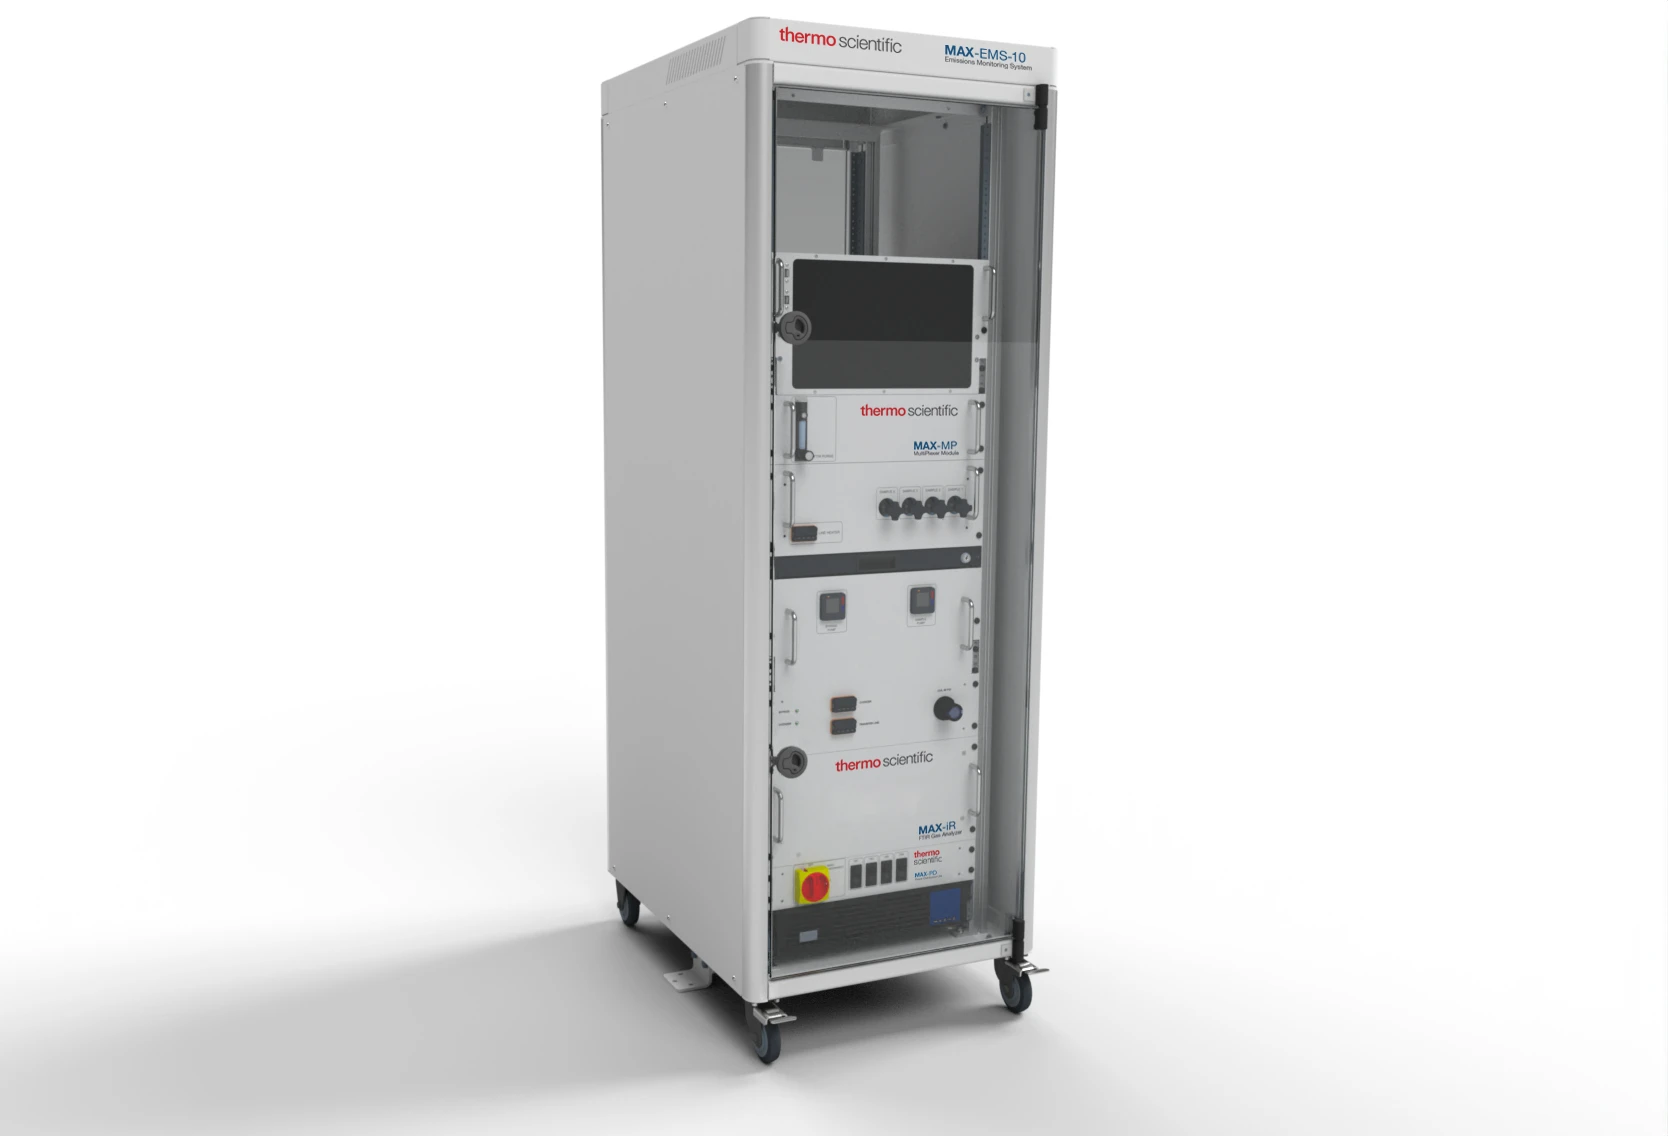 EMS-10 Continuous Emissions Monitoring System